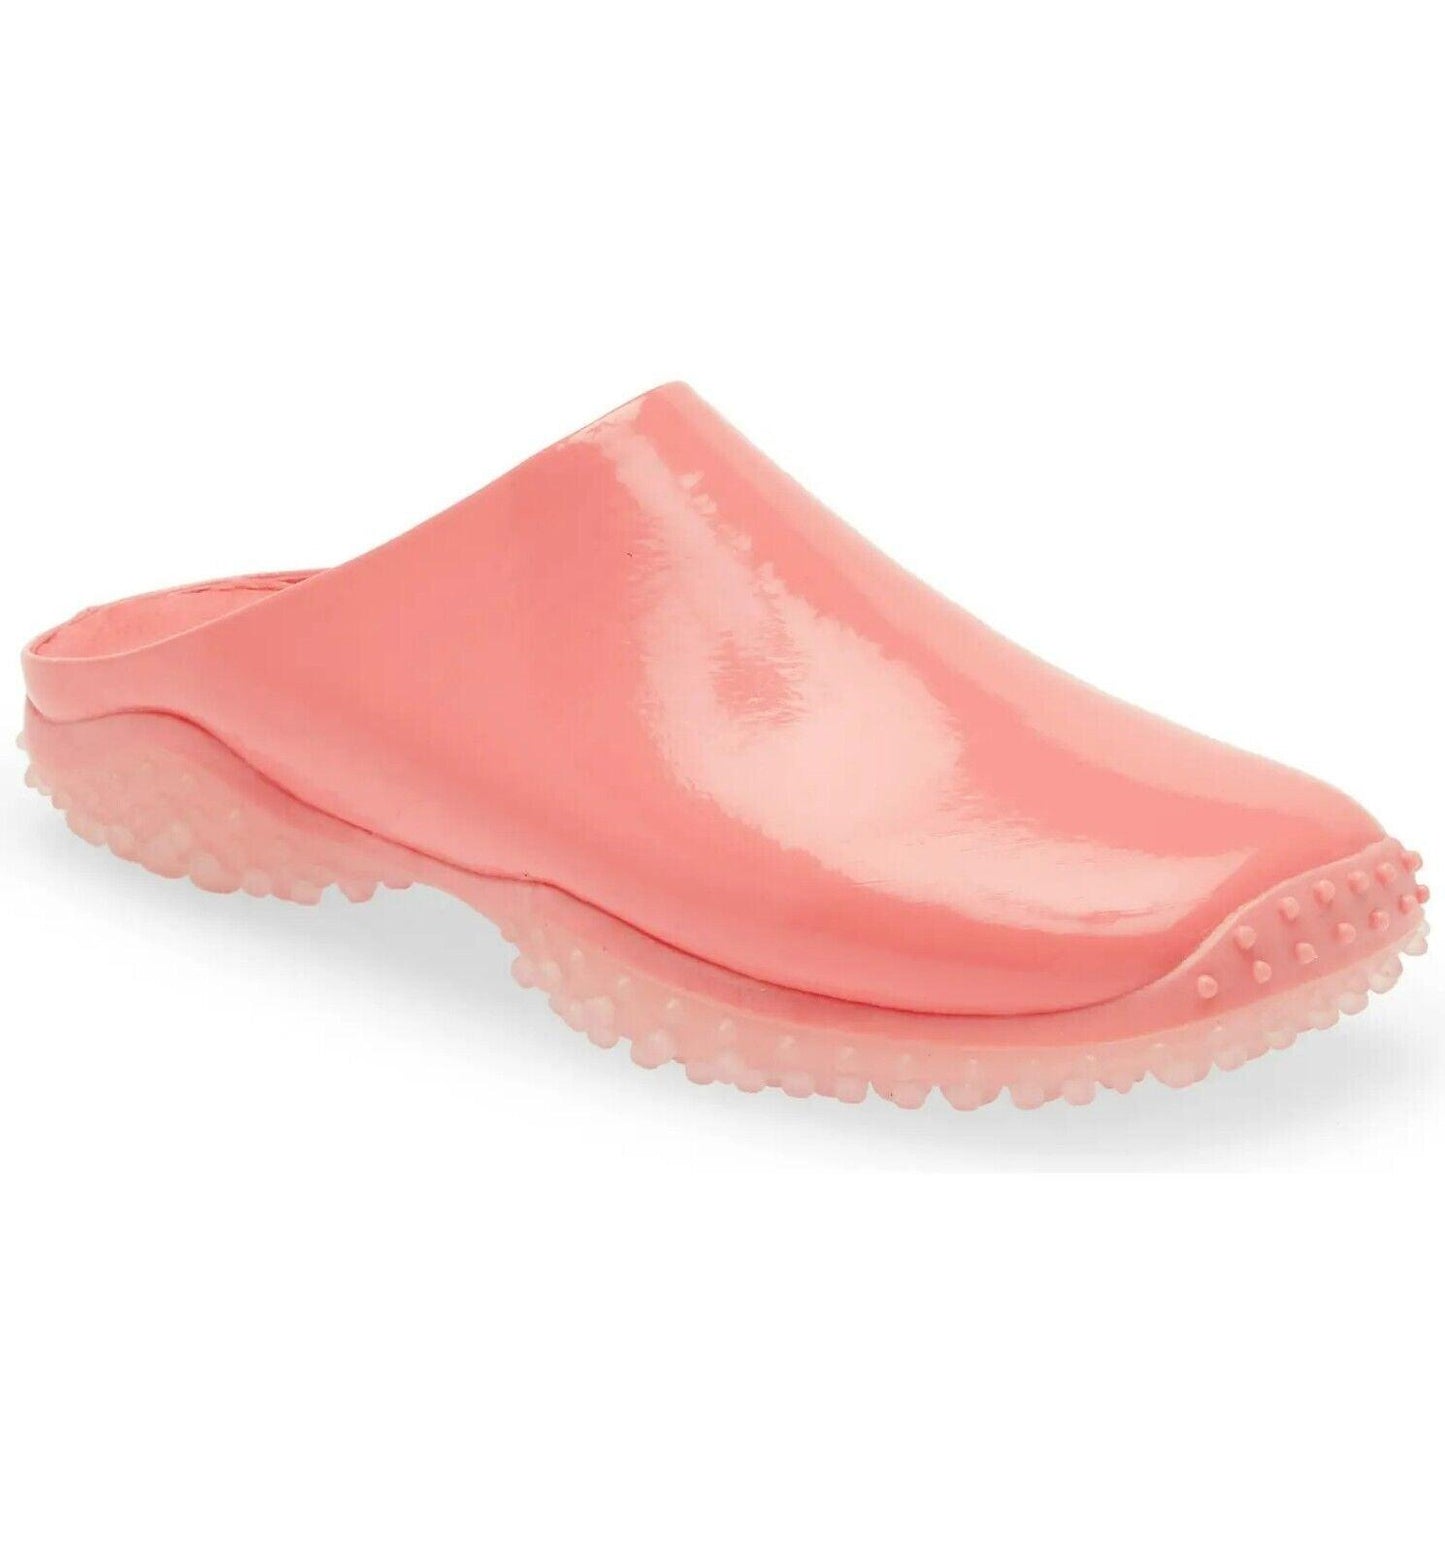 Jeffrey Campbell Lightyear Clog Mules Pink Faux Patent Leather Size US 6.5 - SVNYFancy